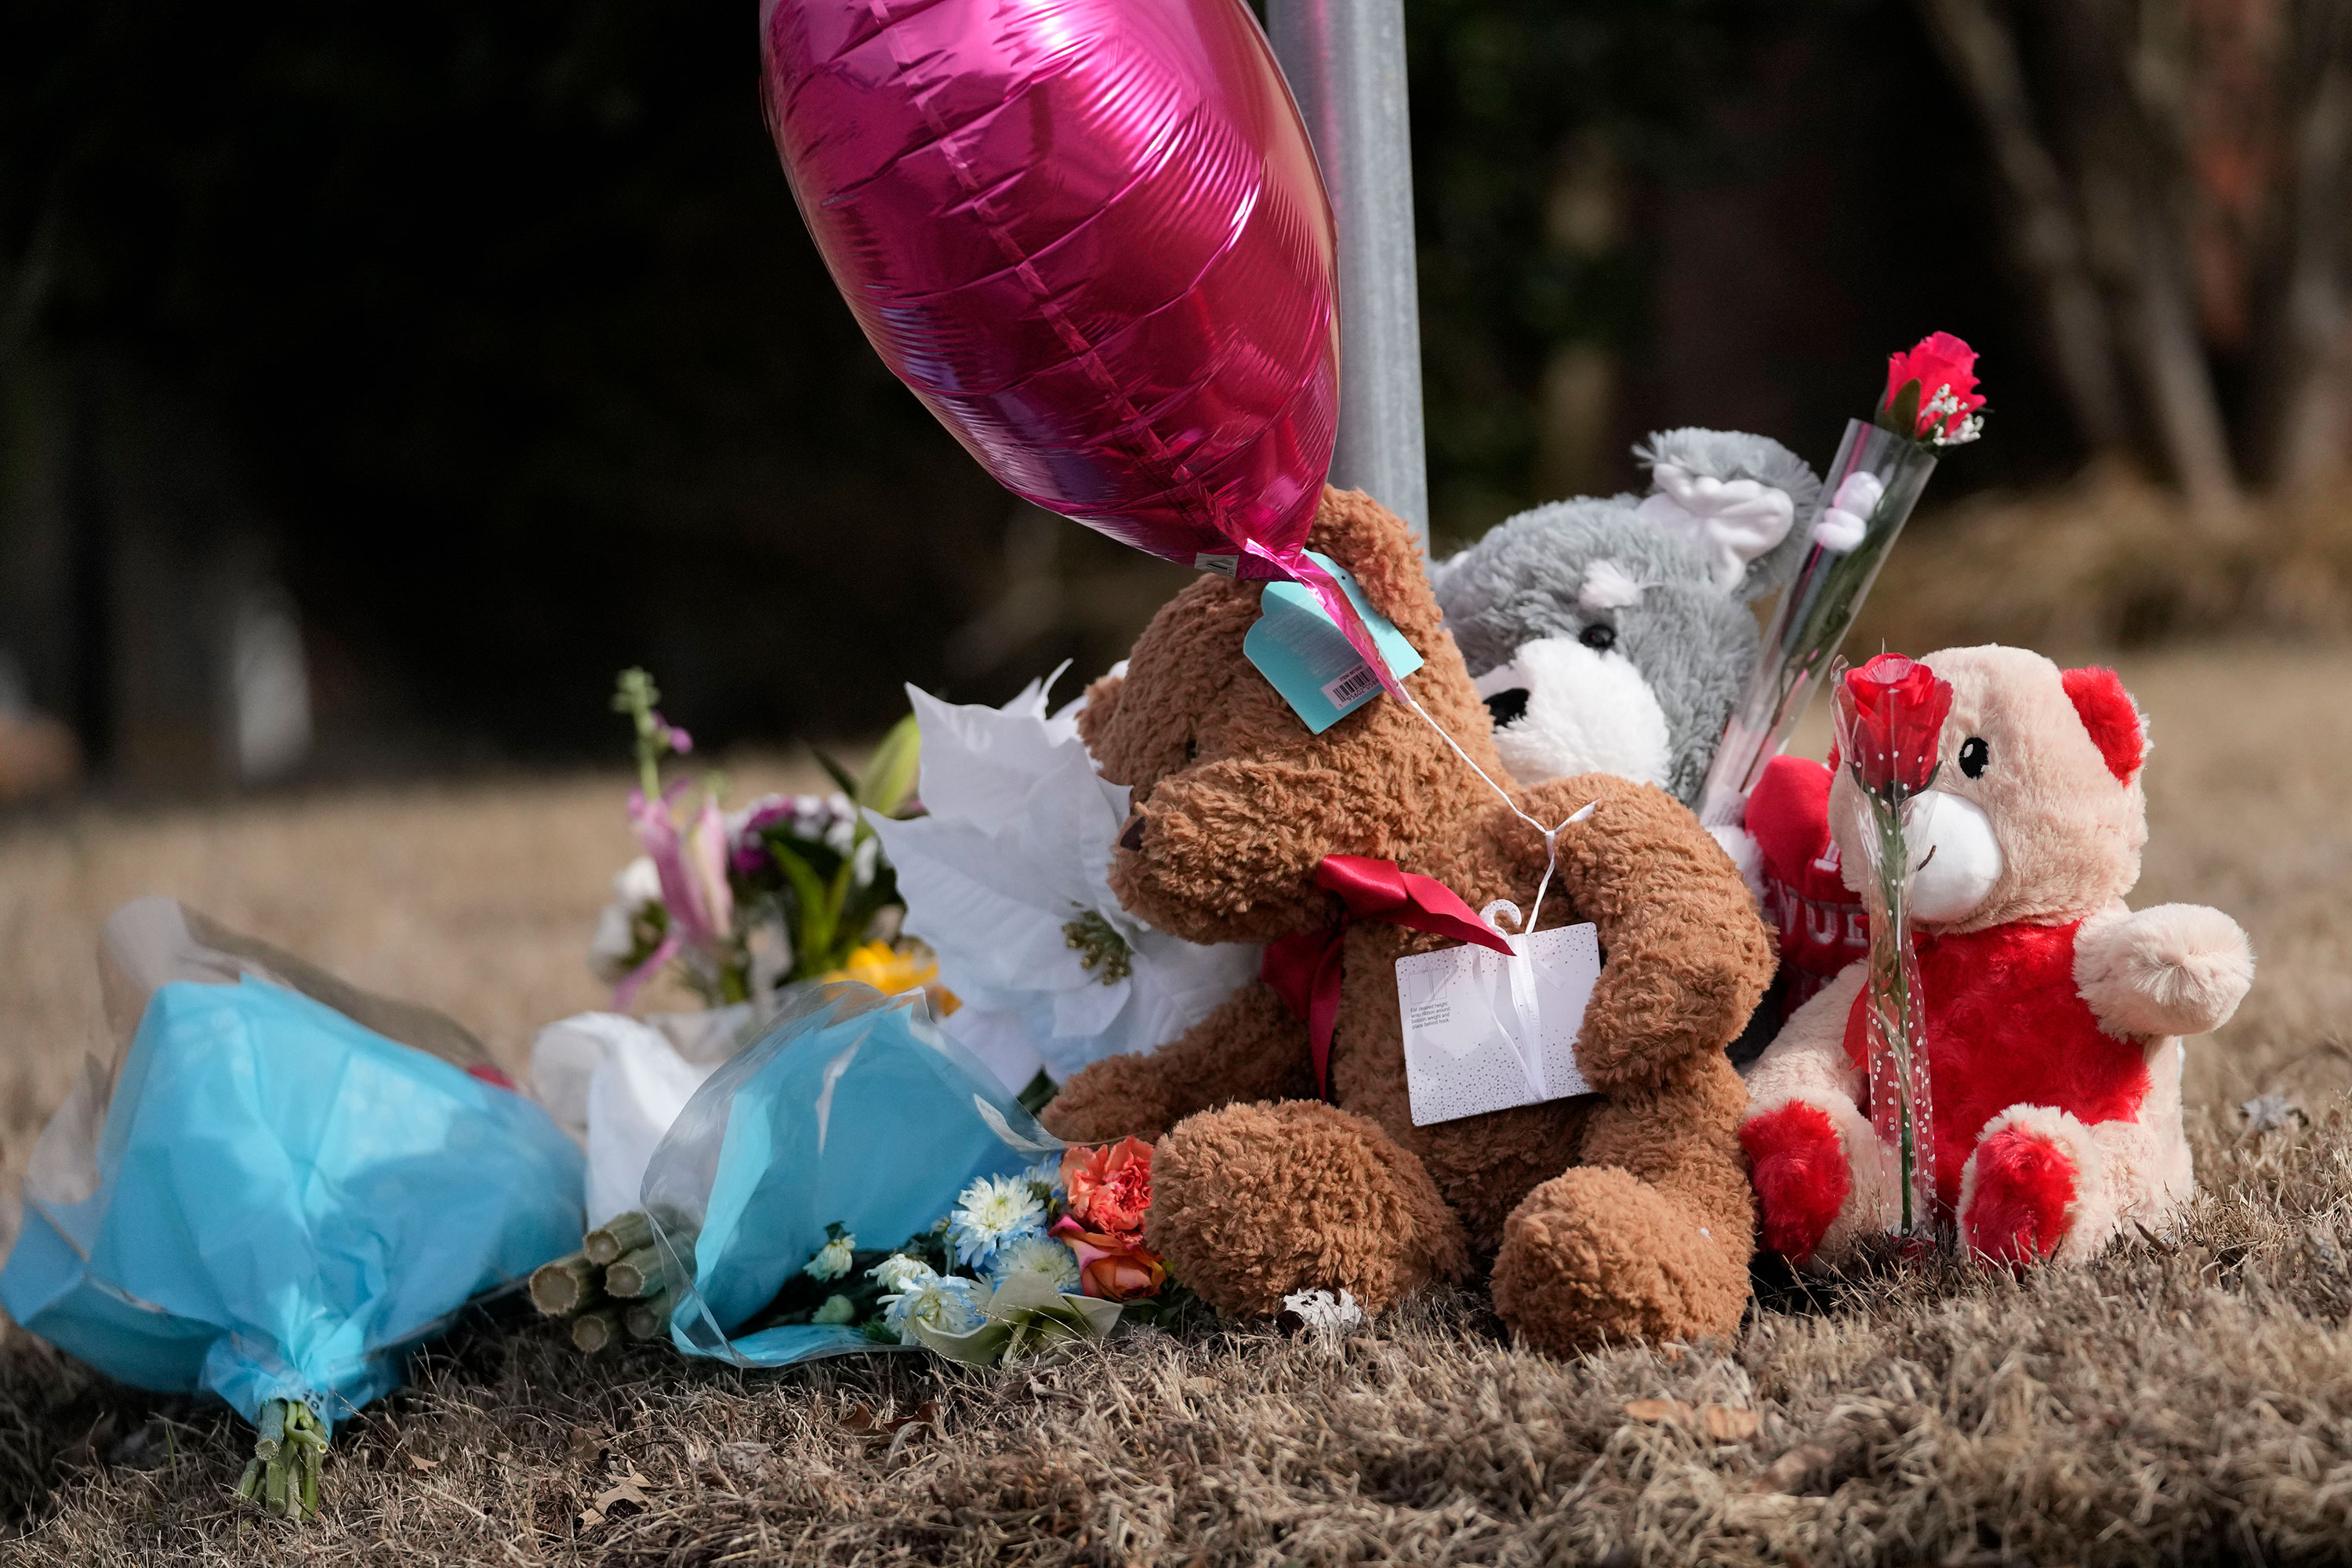 A makeshift memorial is seen where Tyre Nichols was beaten by police and later died, at Bear Creek Cove and Castlegate Lane in Memphis on Saturday. 